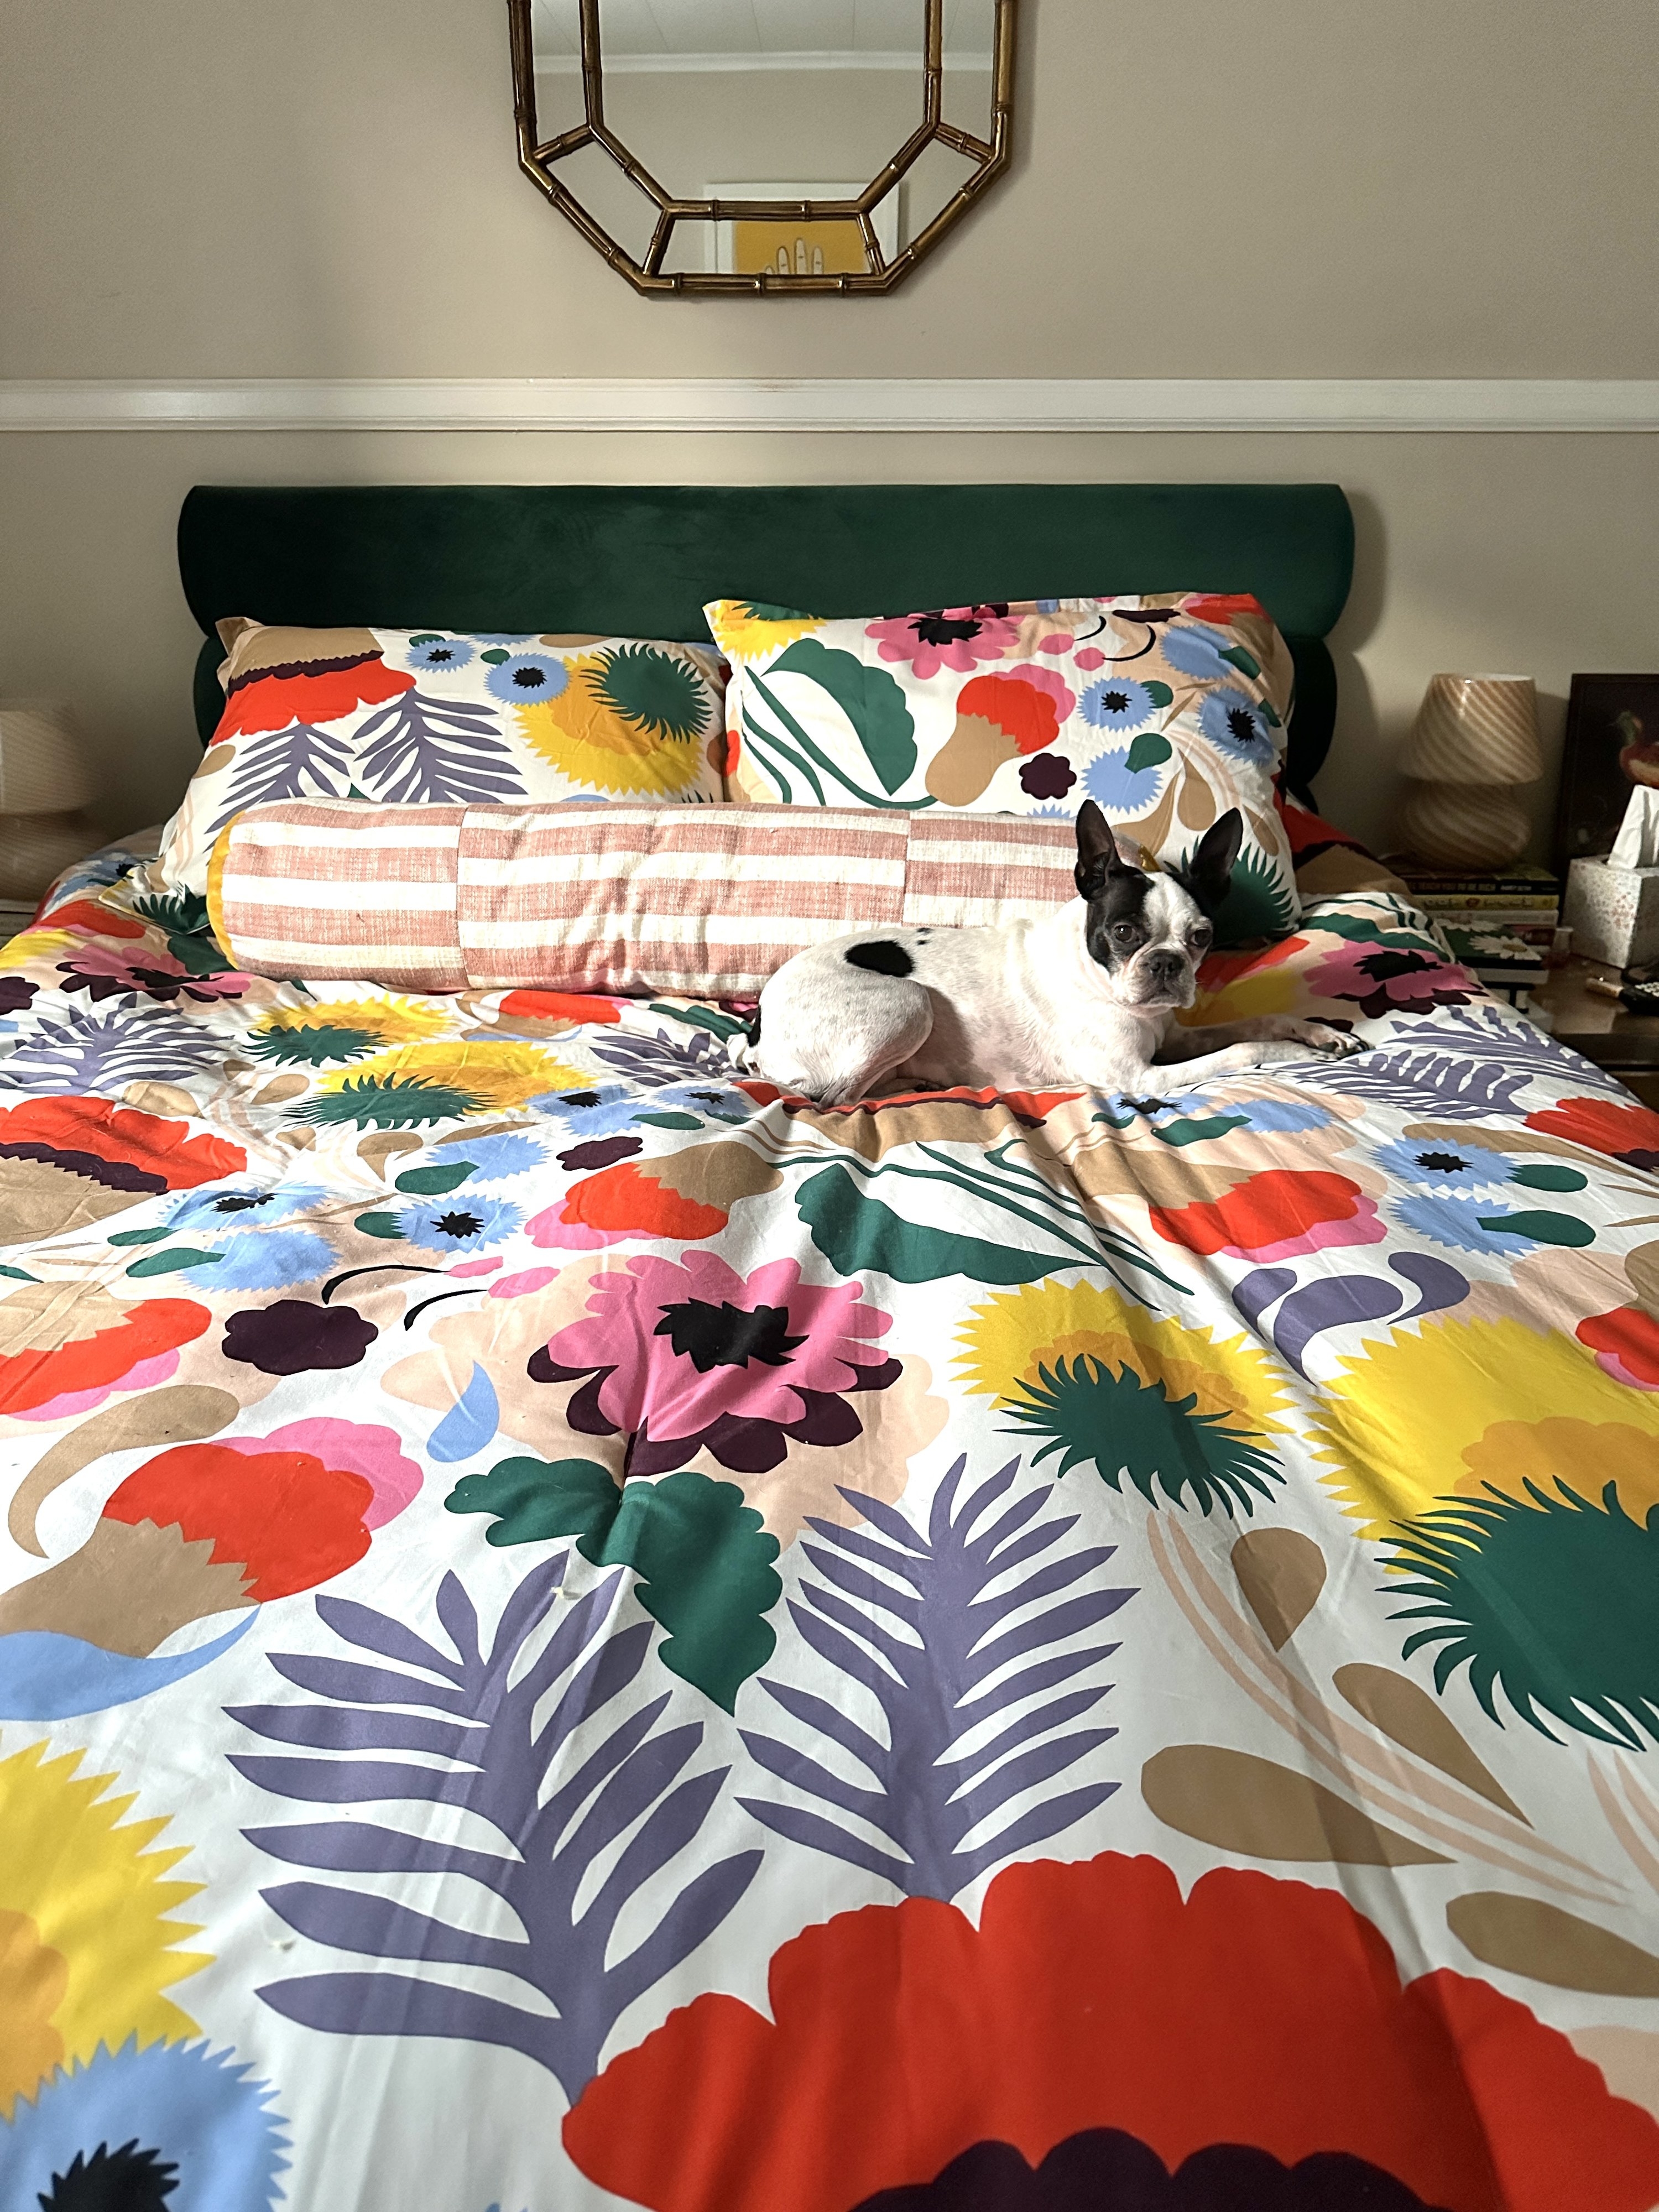 the colorful bedding set on a bed with a dog laying on top